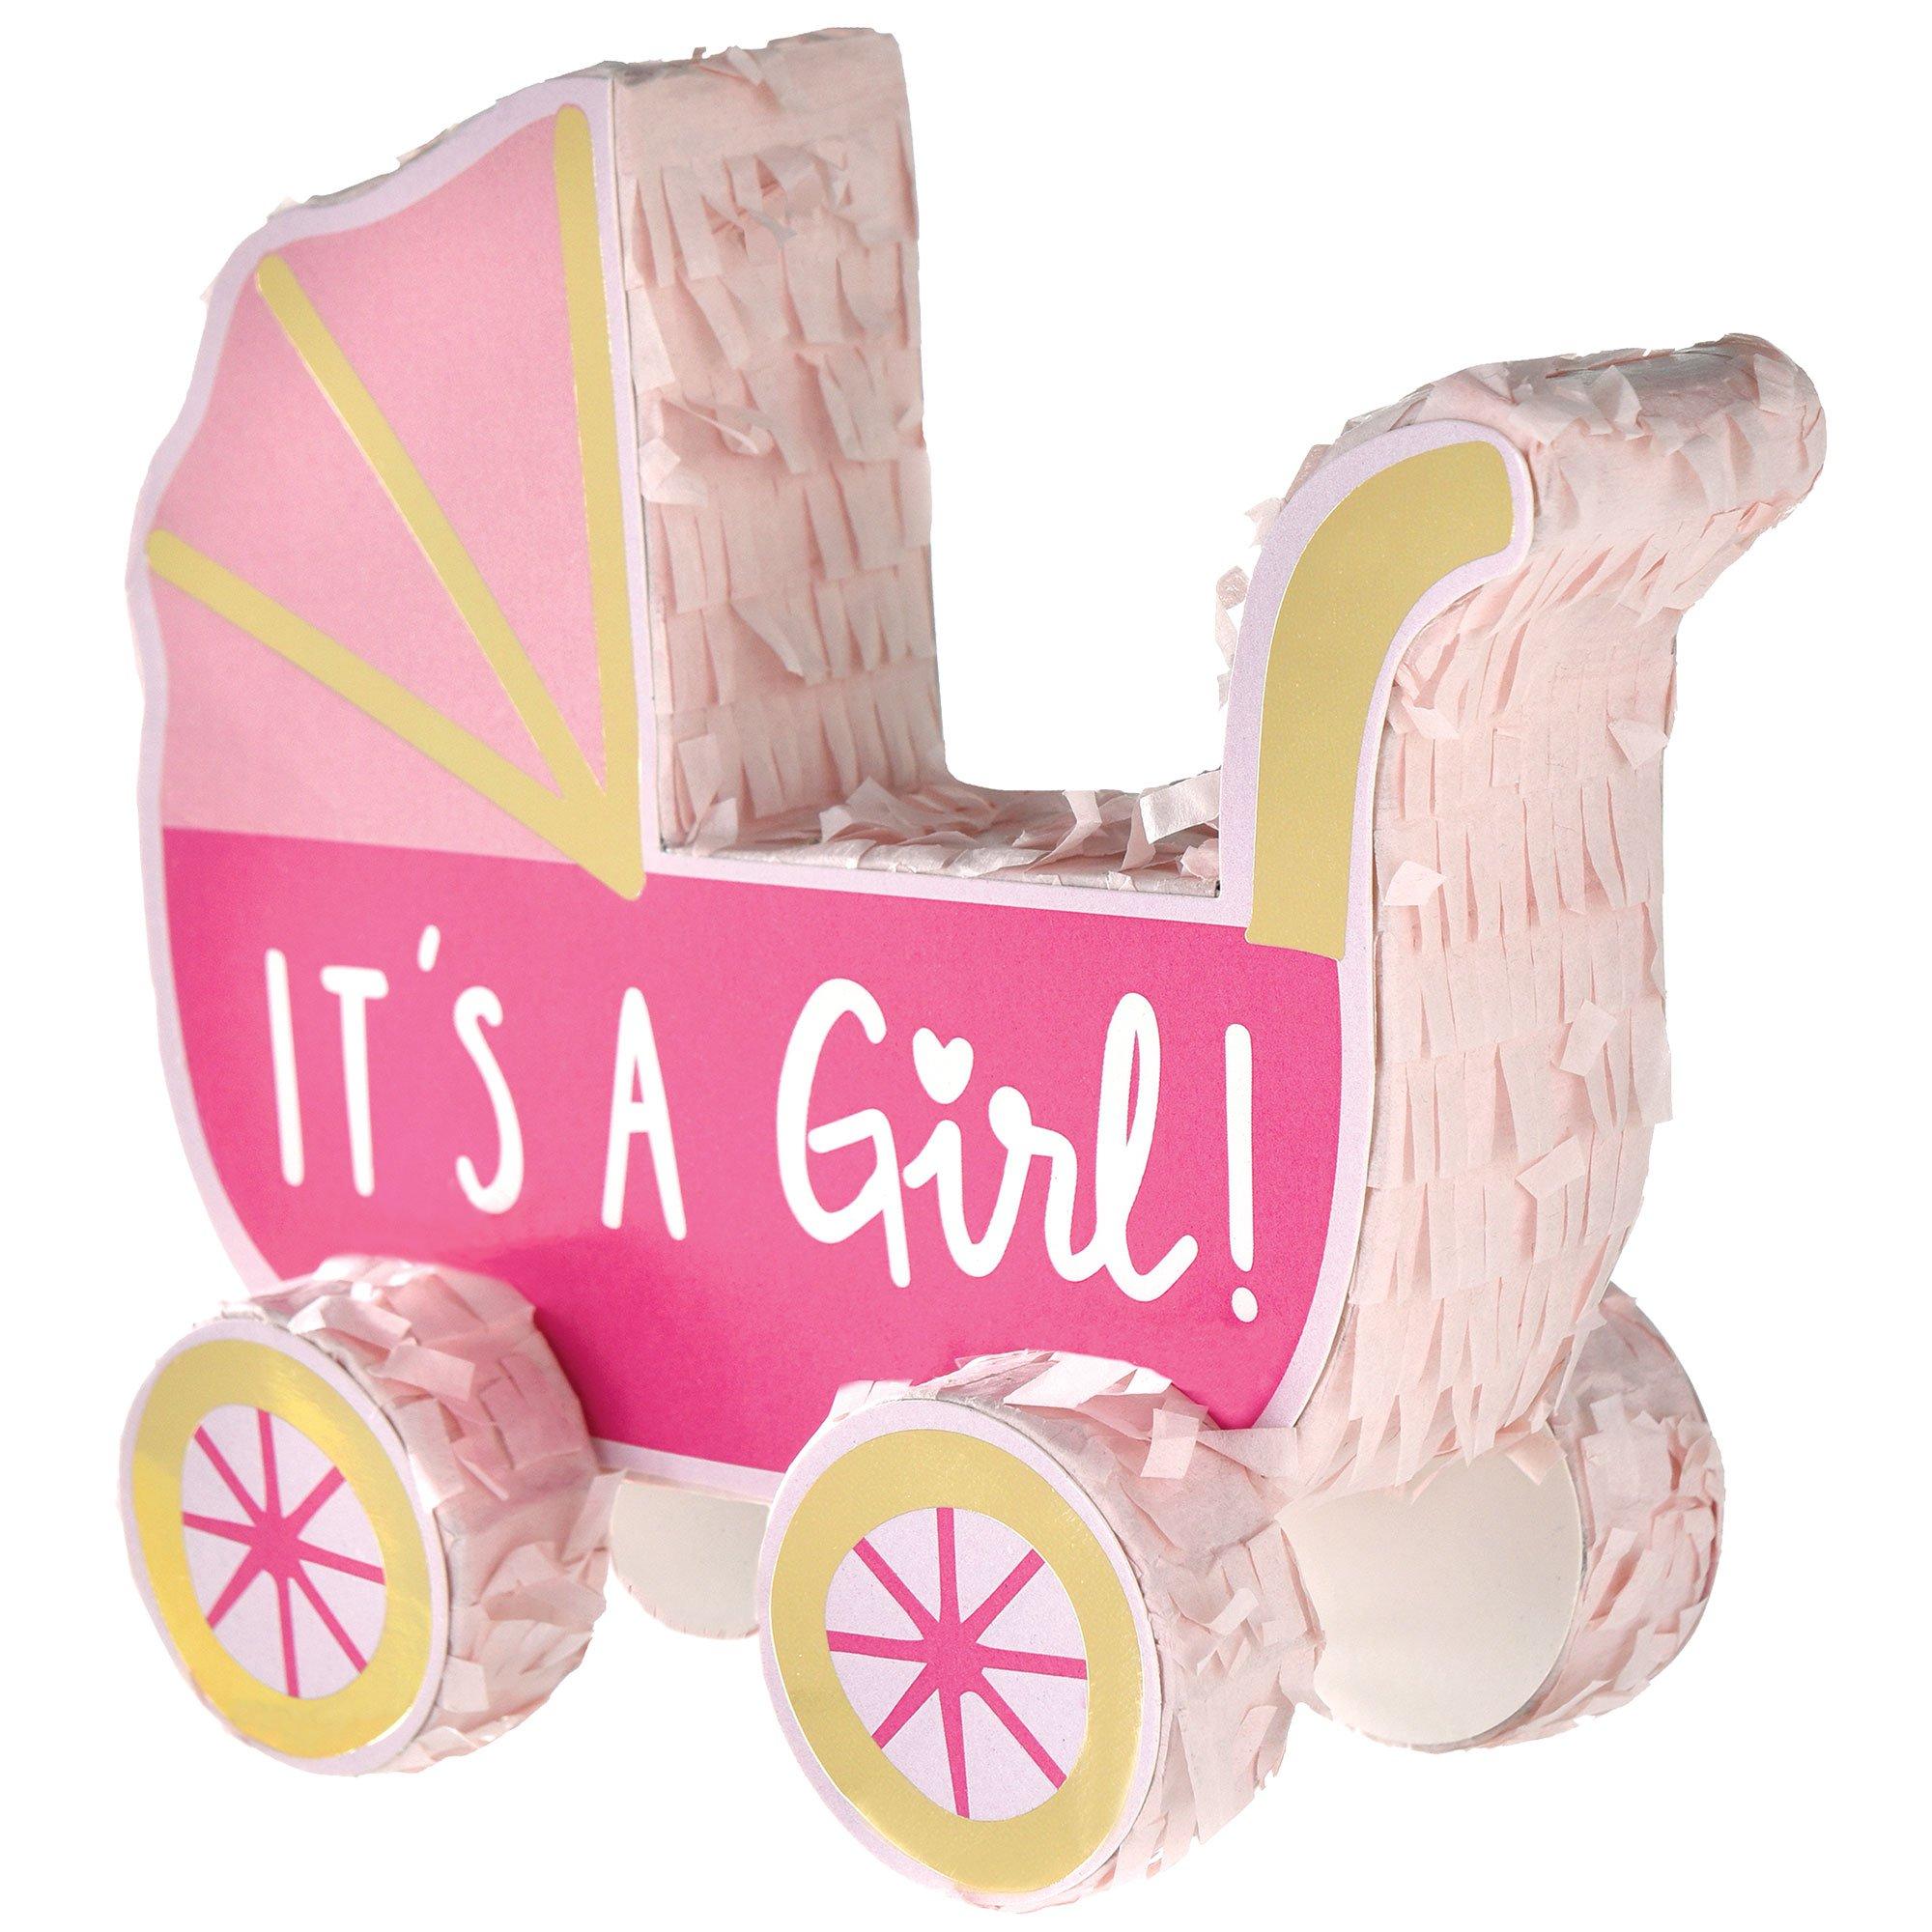 Pink Baby Shower Decoration It's a Girl Baby Decoration, Oh Baby